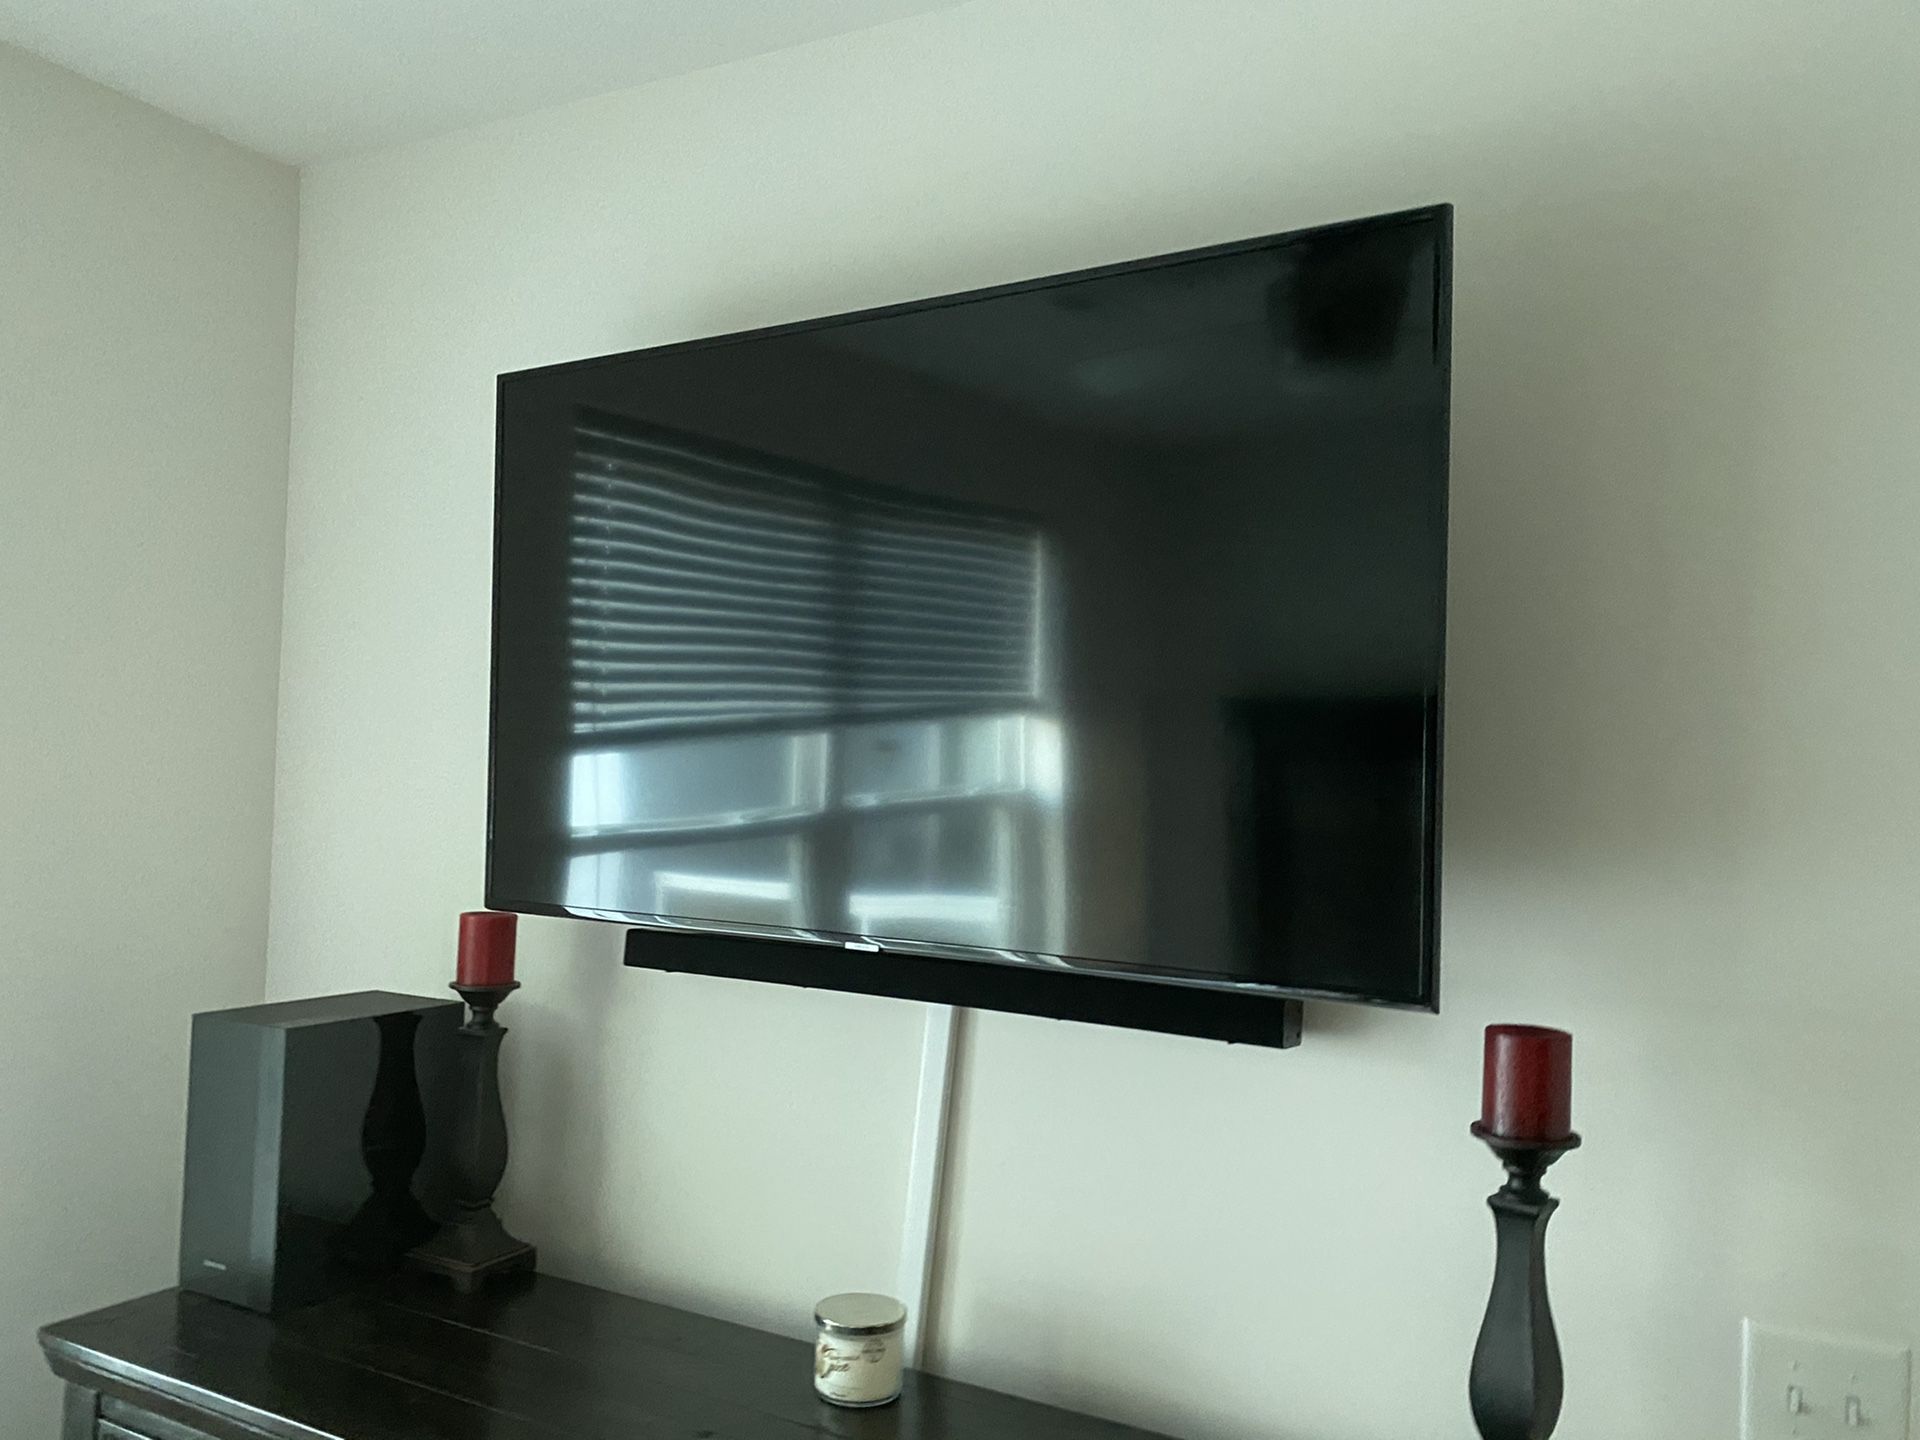 55 in Samsung with tv mount